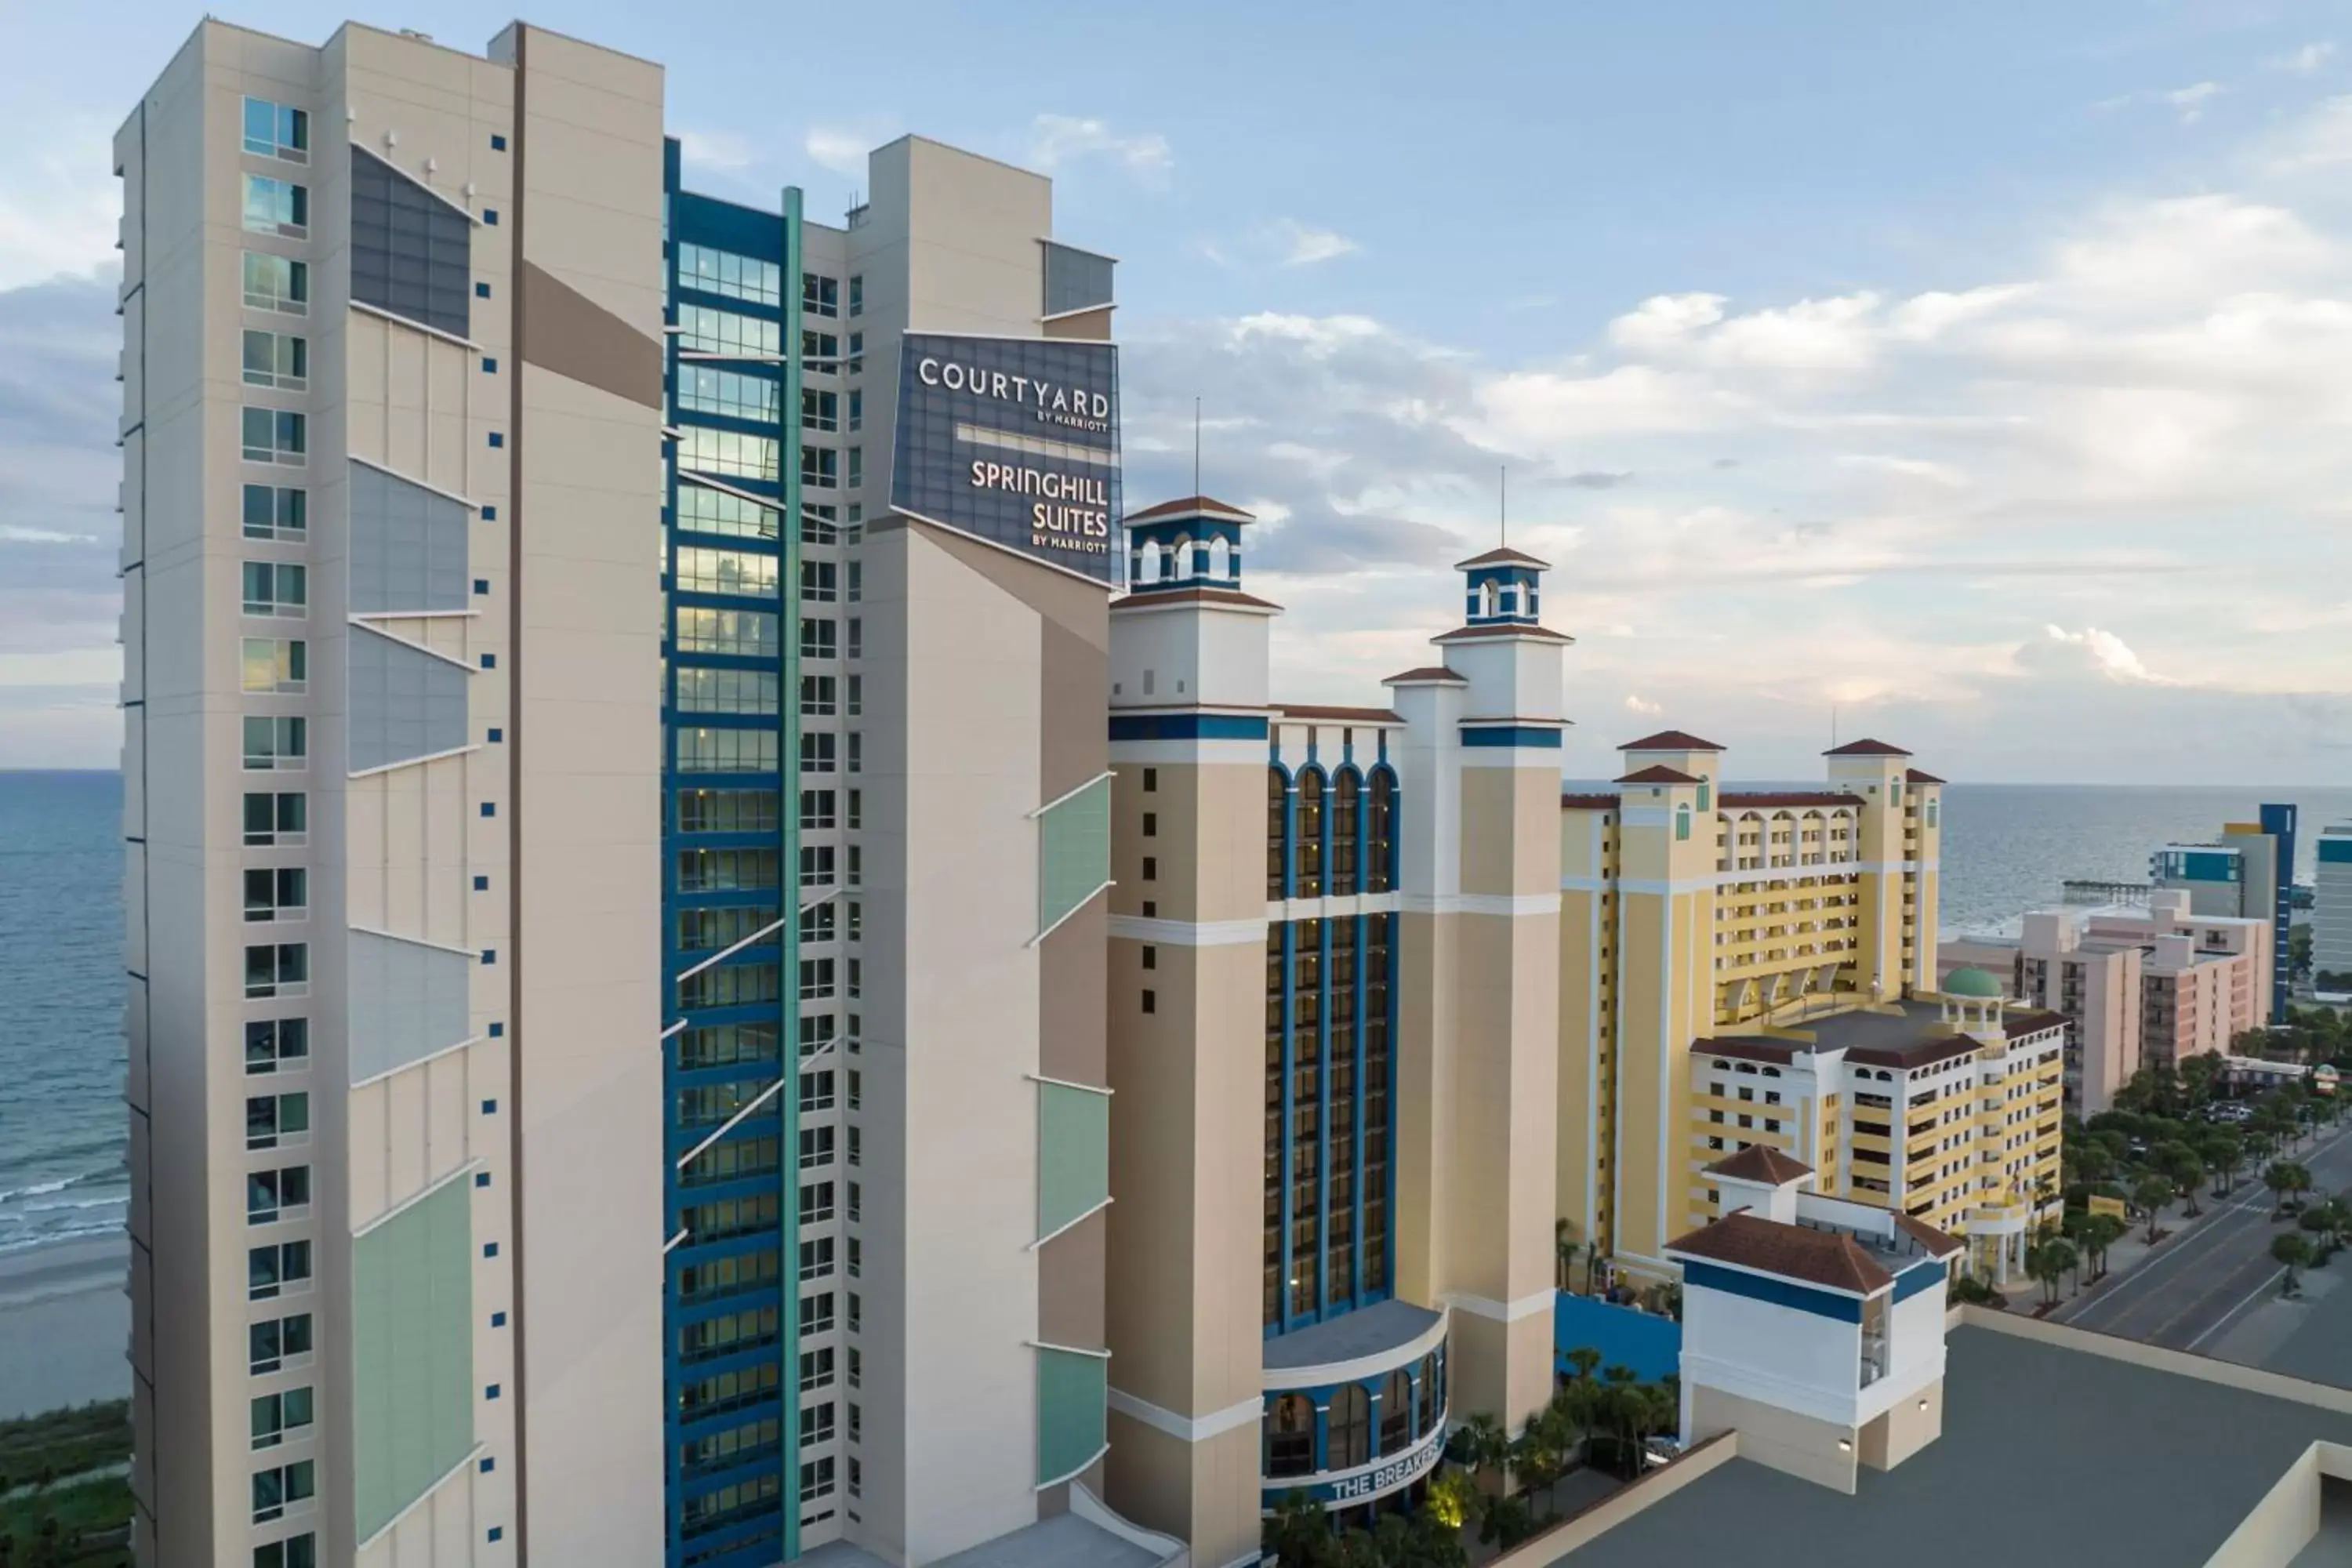 Property Building in SpringHill Suites by Marriott Myrtle Beach Oceanfront